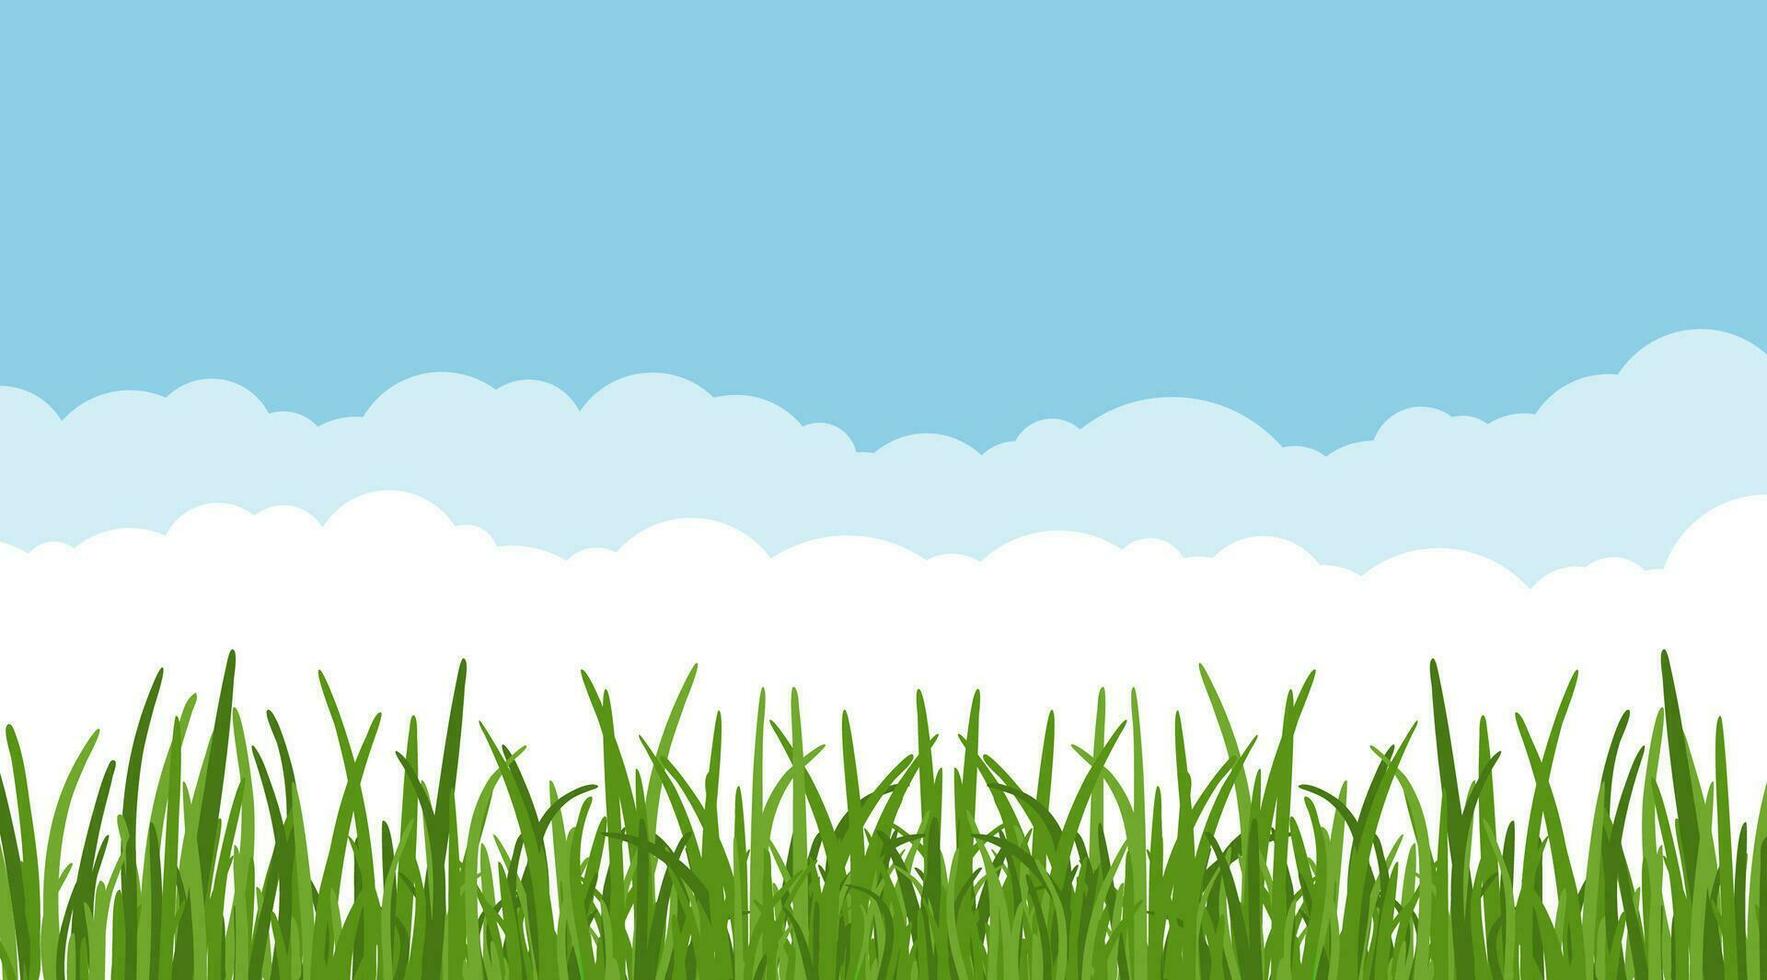 Landscape with green grass against the blue sky and clouds background. grass leaves and lawn at the foreground. vector